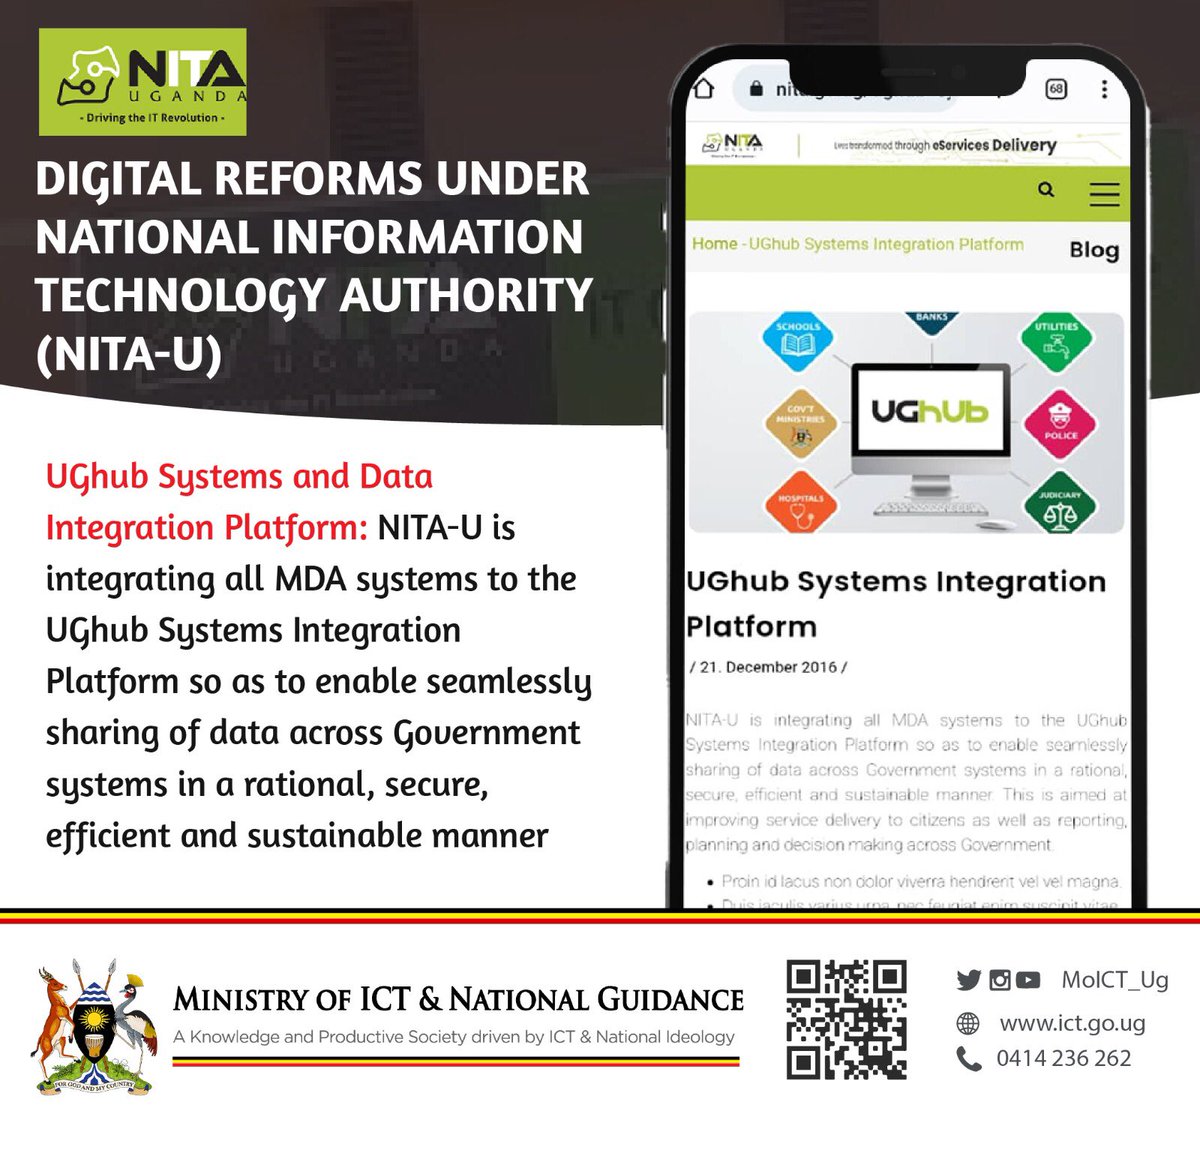 The UGhub systems and Data Integration platform enables sharing of data across government systems. This is aimed at improving service delivery to citizens across government and private entities.
@MoICT_Ug @NITAUganda1 @DMU_Uganda